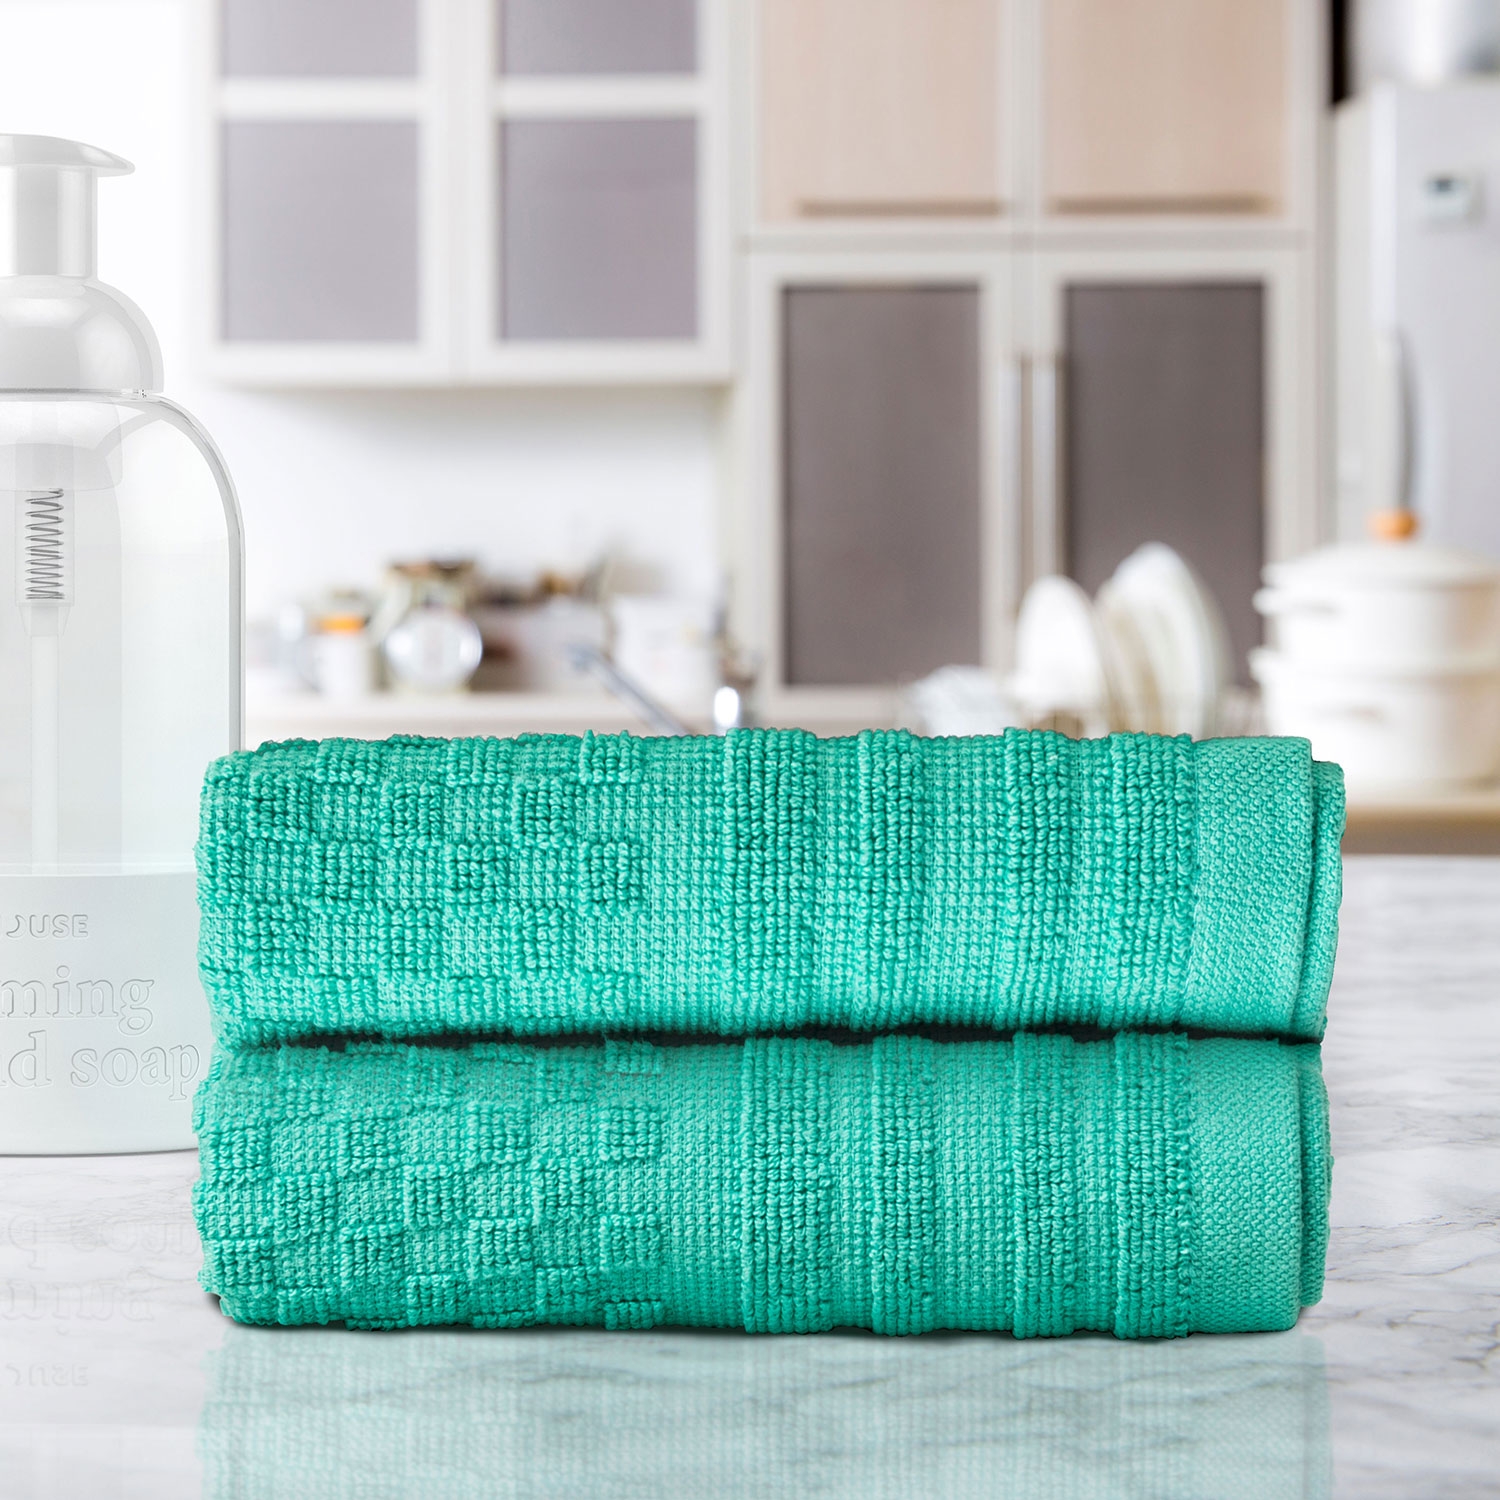 Freshee Kitchen Towel and Dishcloth Set with Antimicrobial